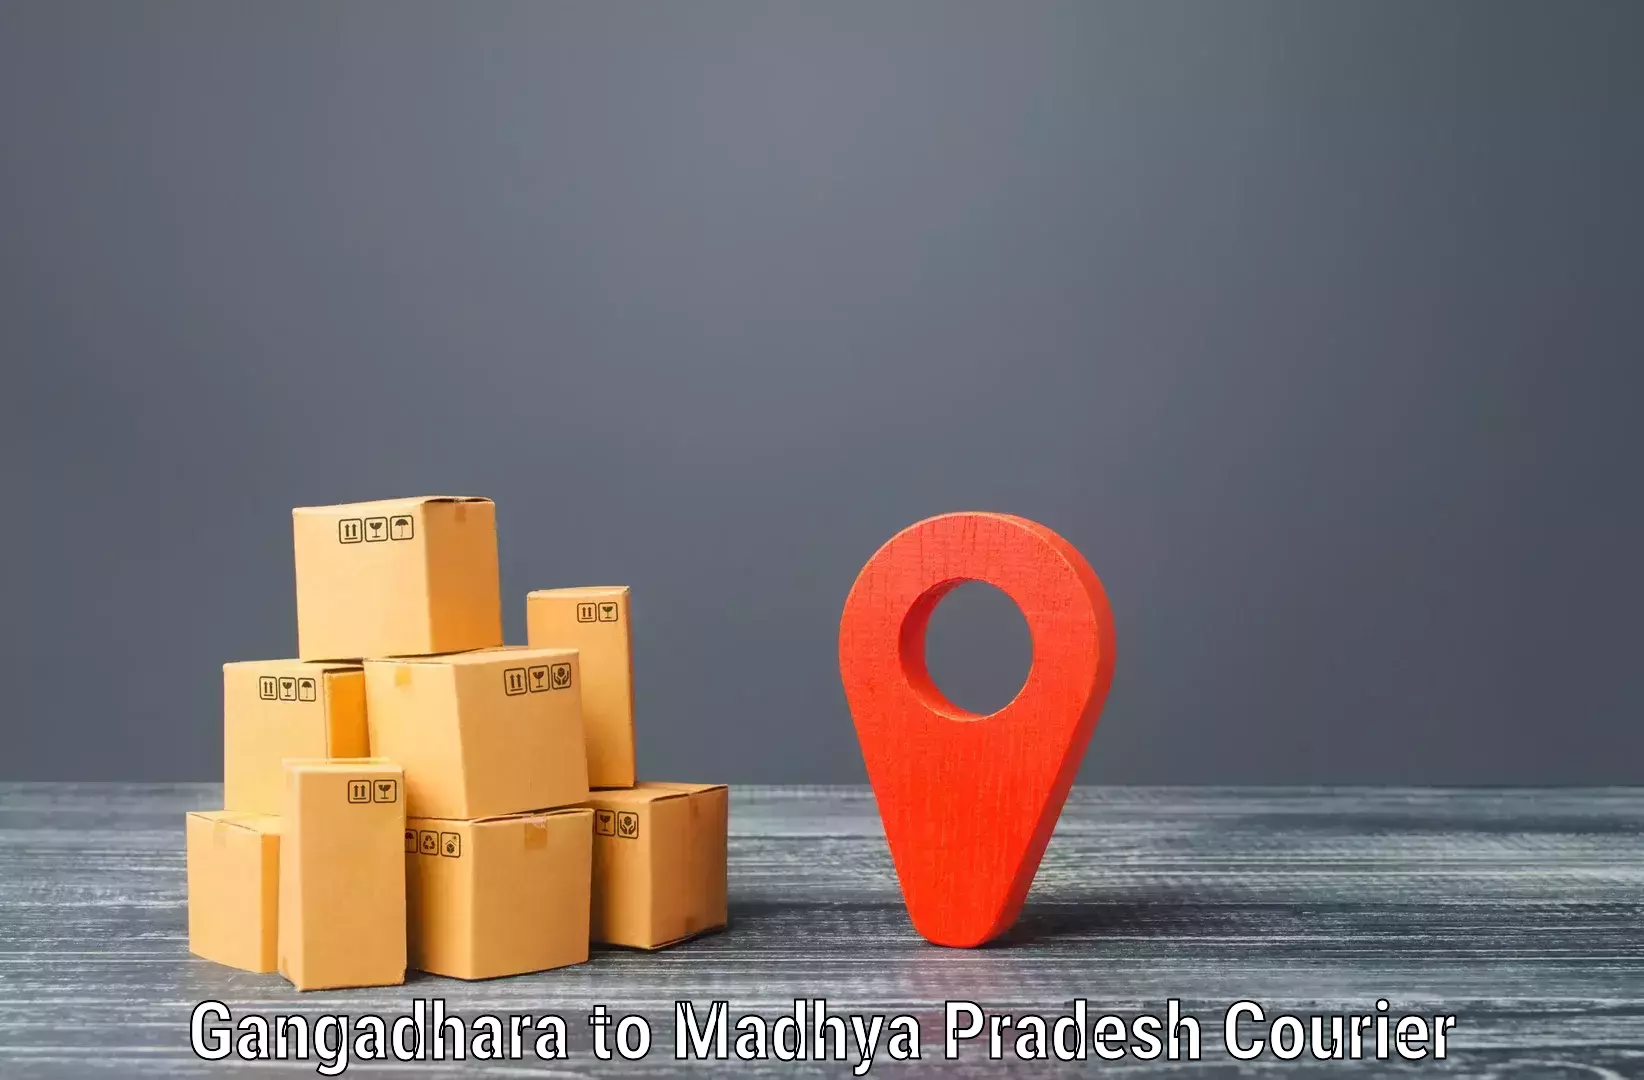 Global shipping networks in Gangadhara to Dhar